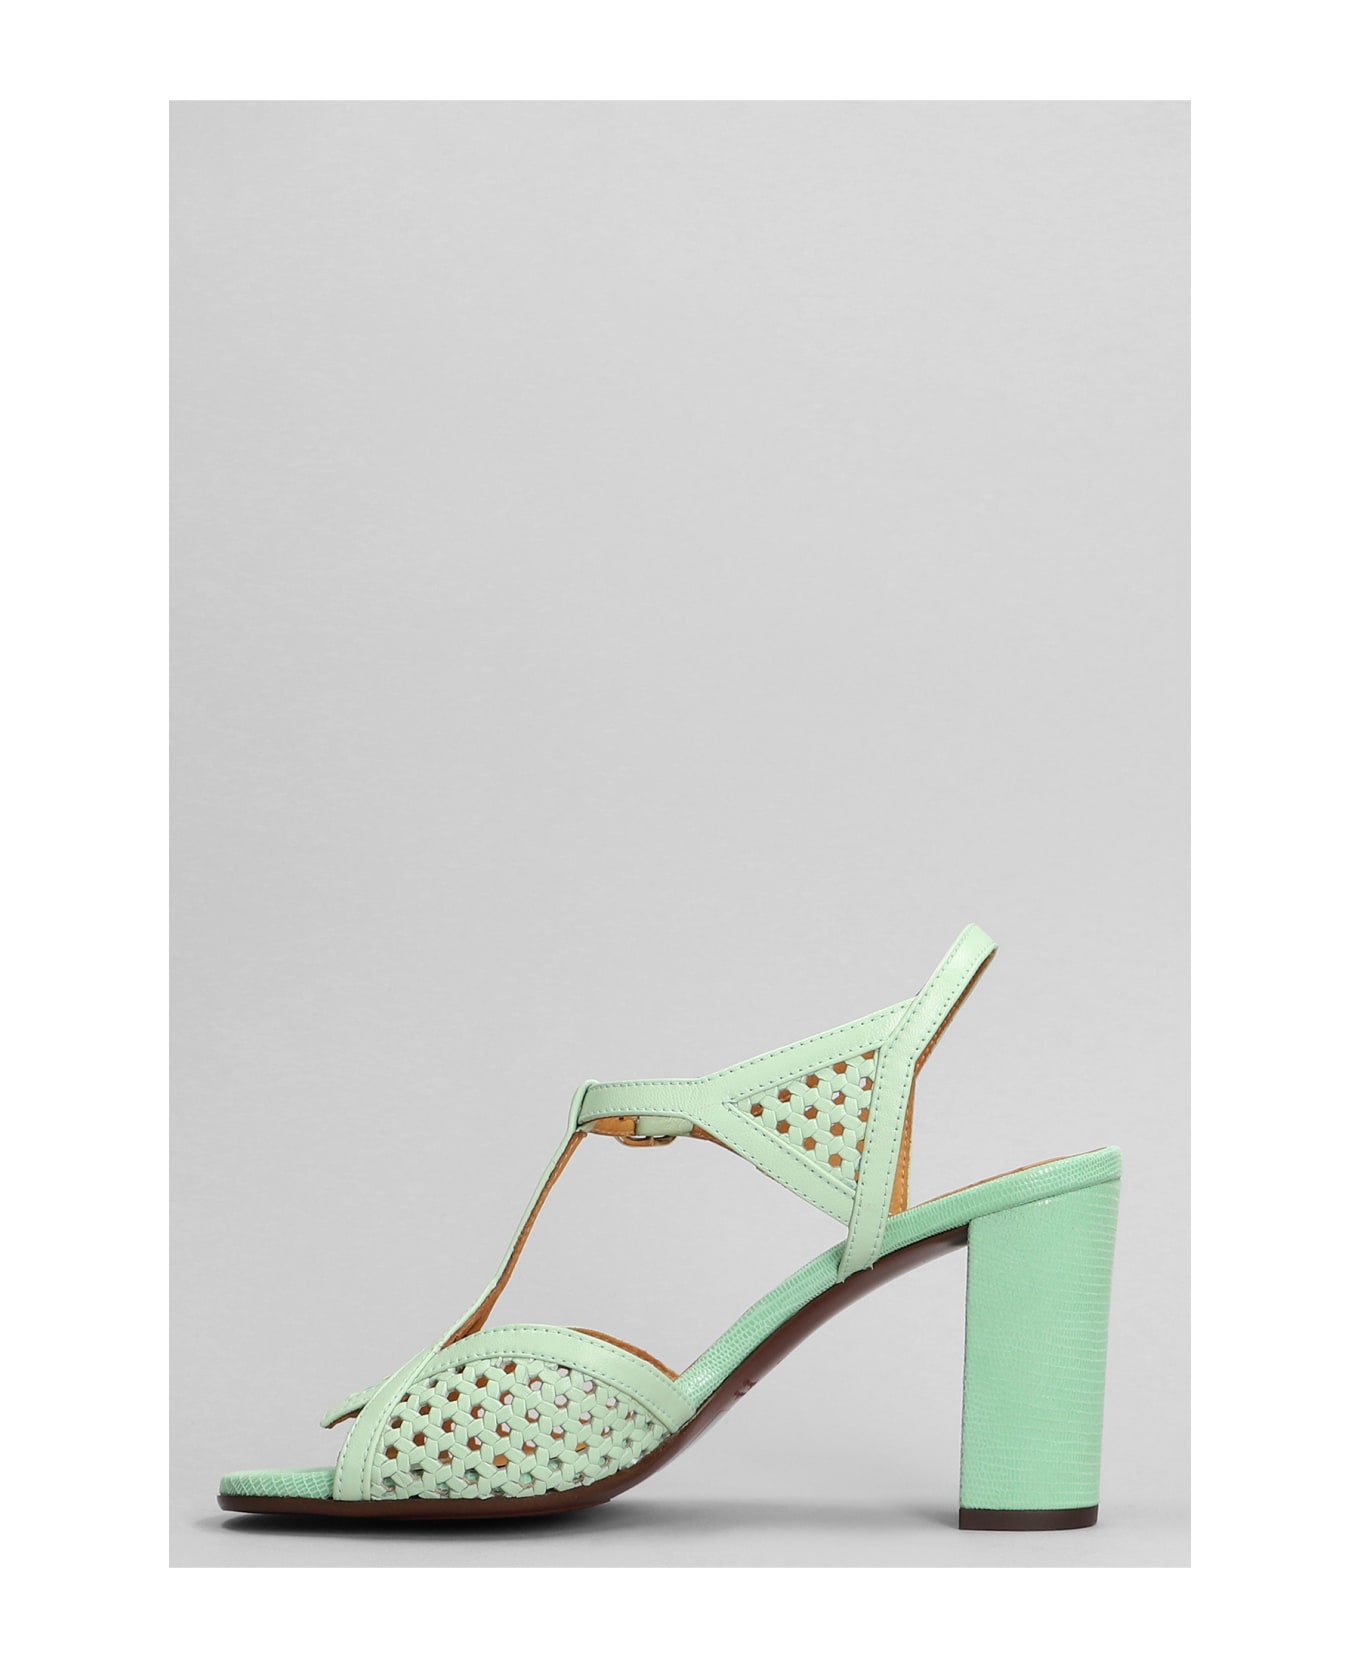 Chie Mihara Bessy Sandals In Green Leather - green サンダル